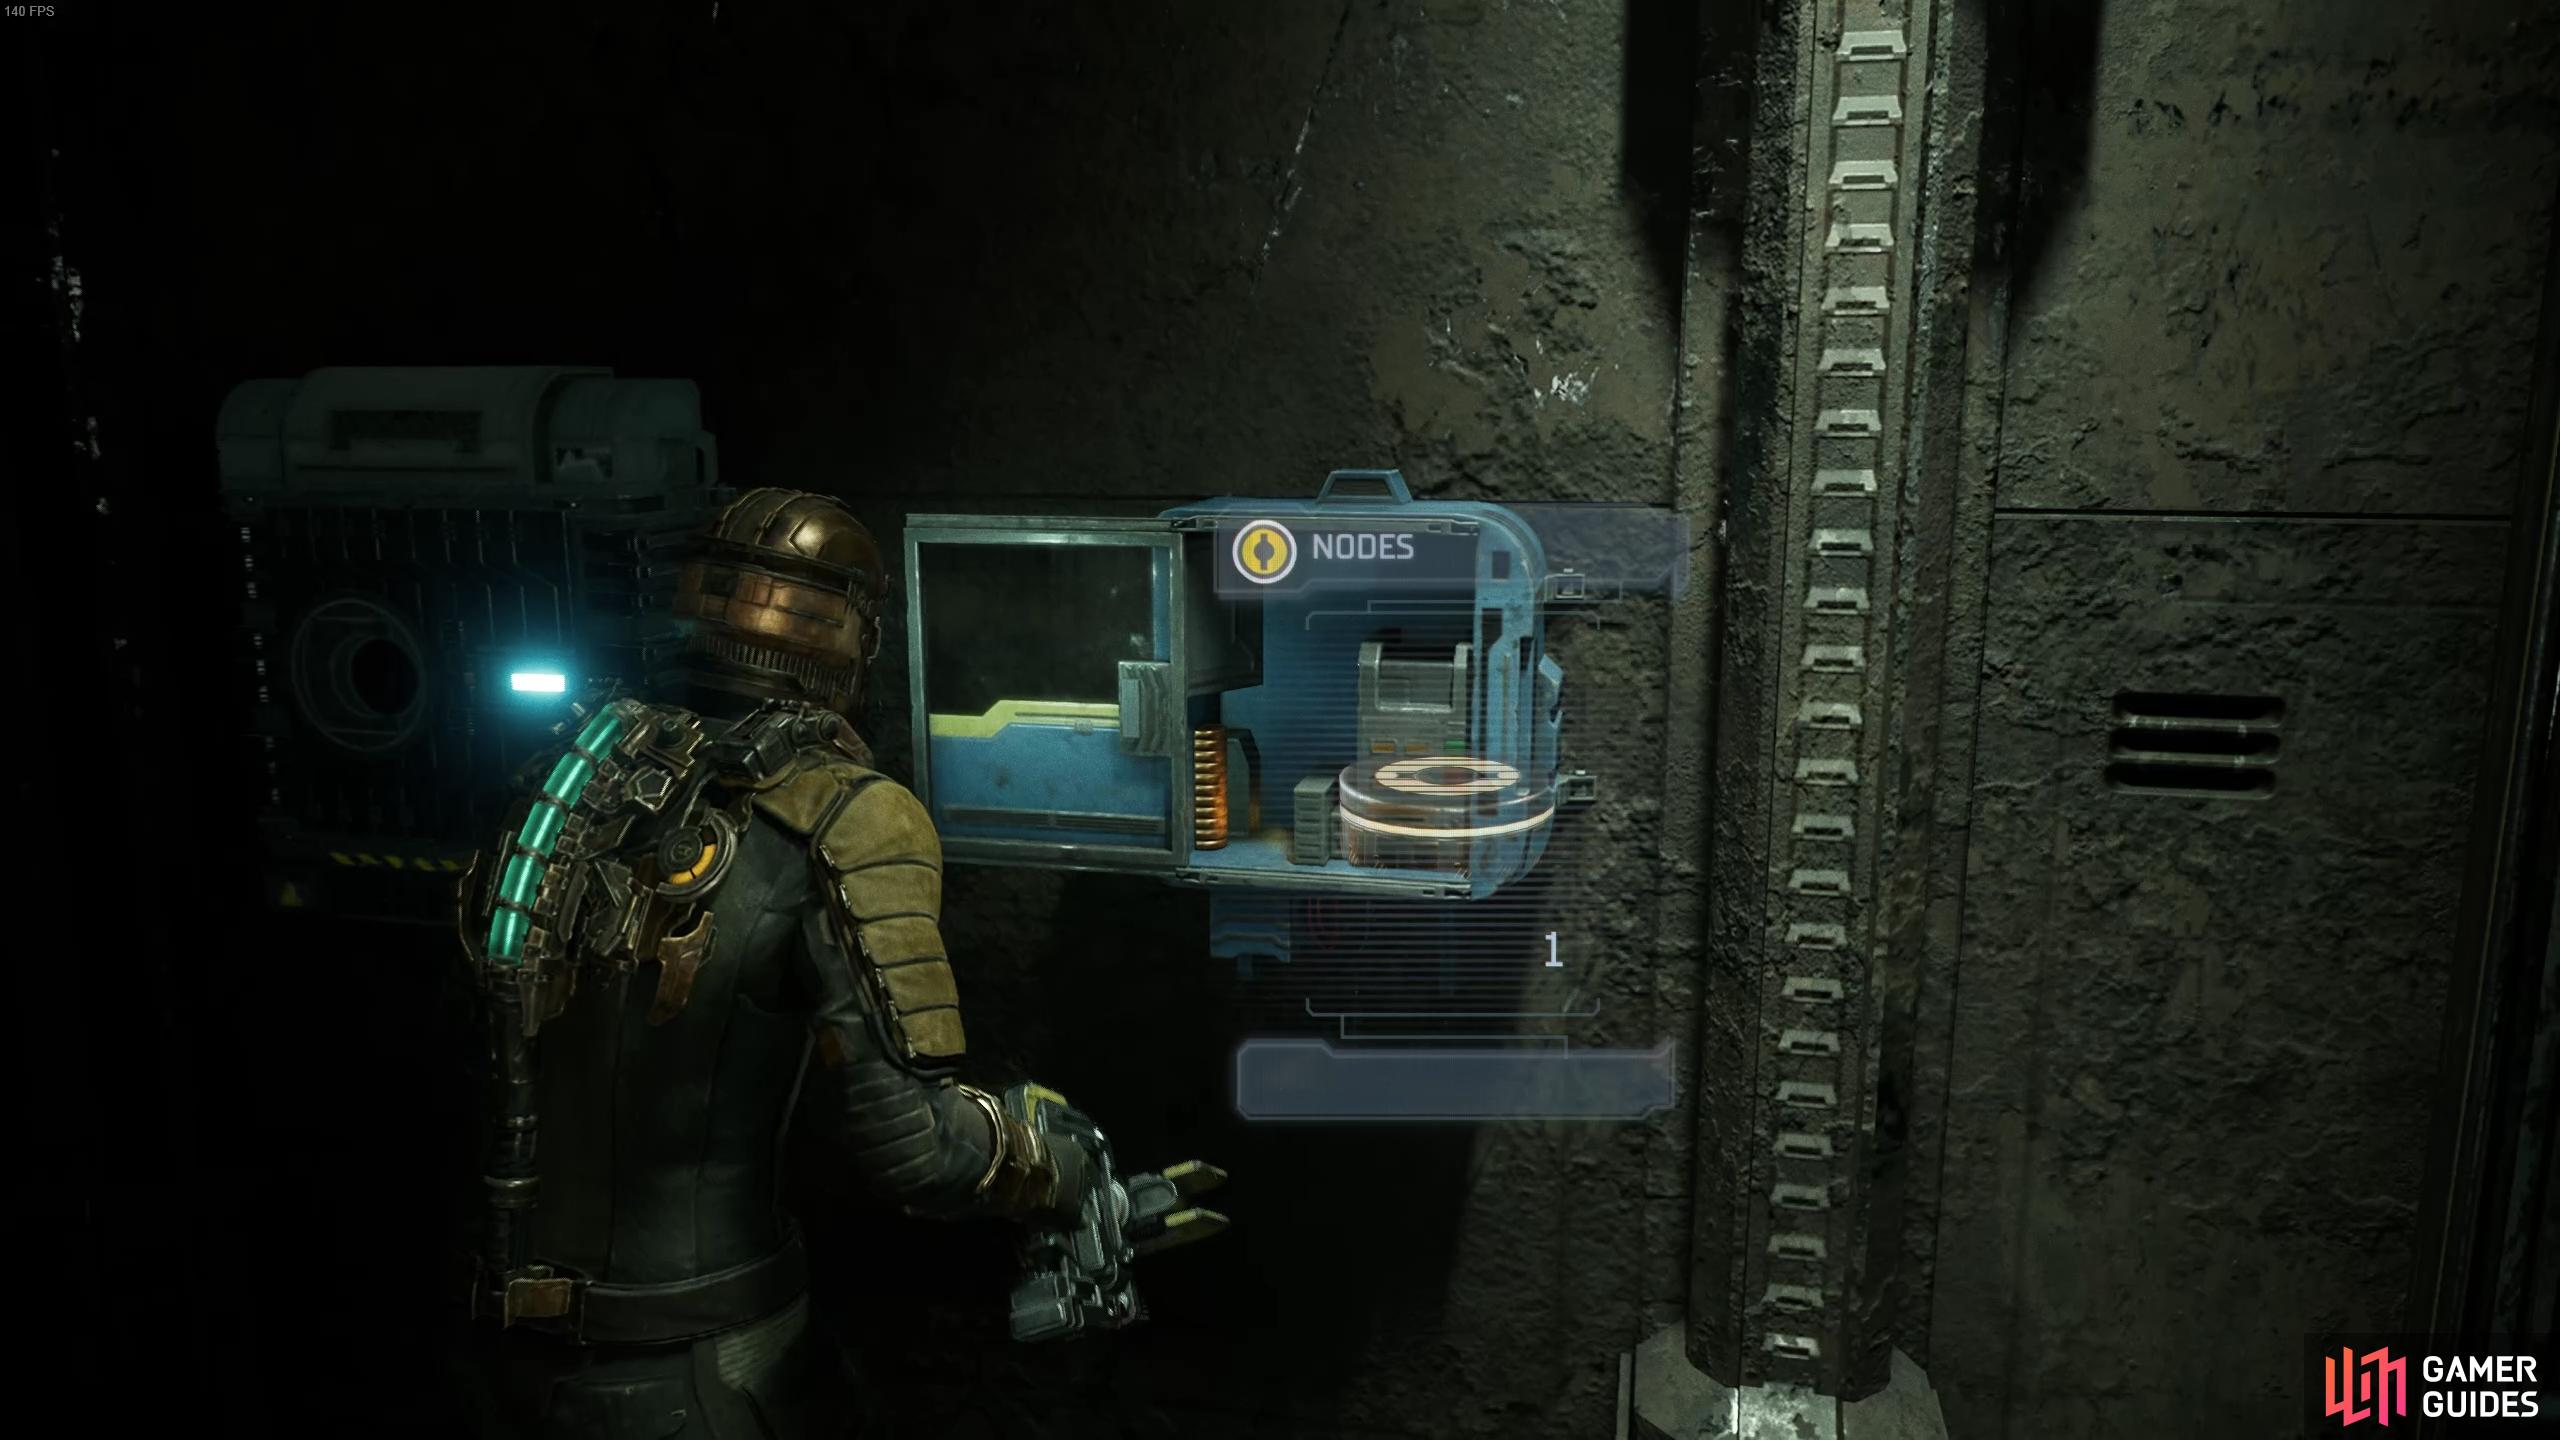 The node can be found inside this cabinet within the Tram Repair Room.